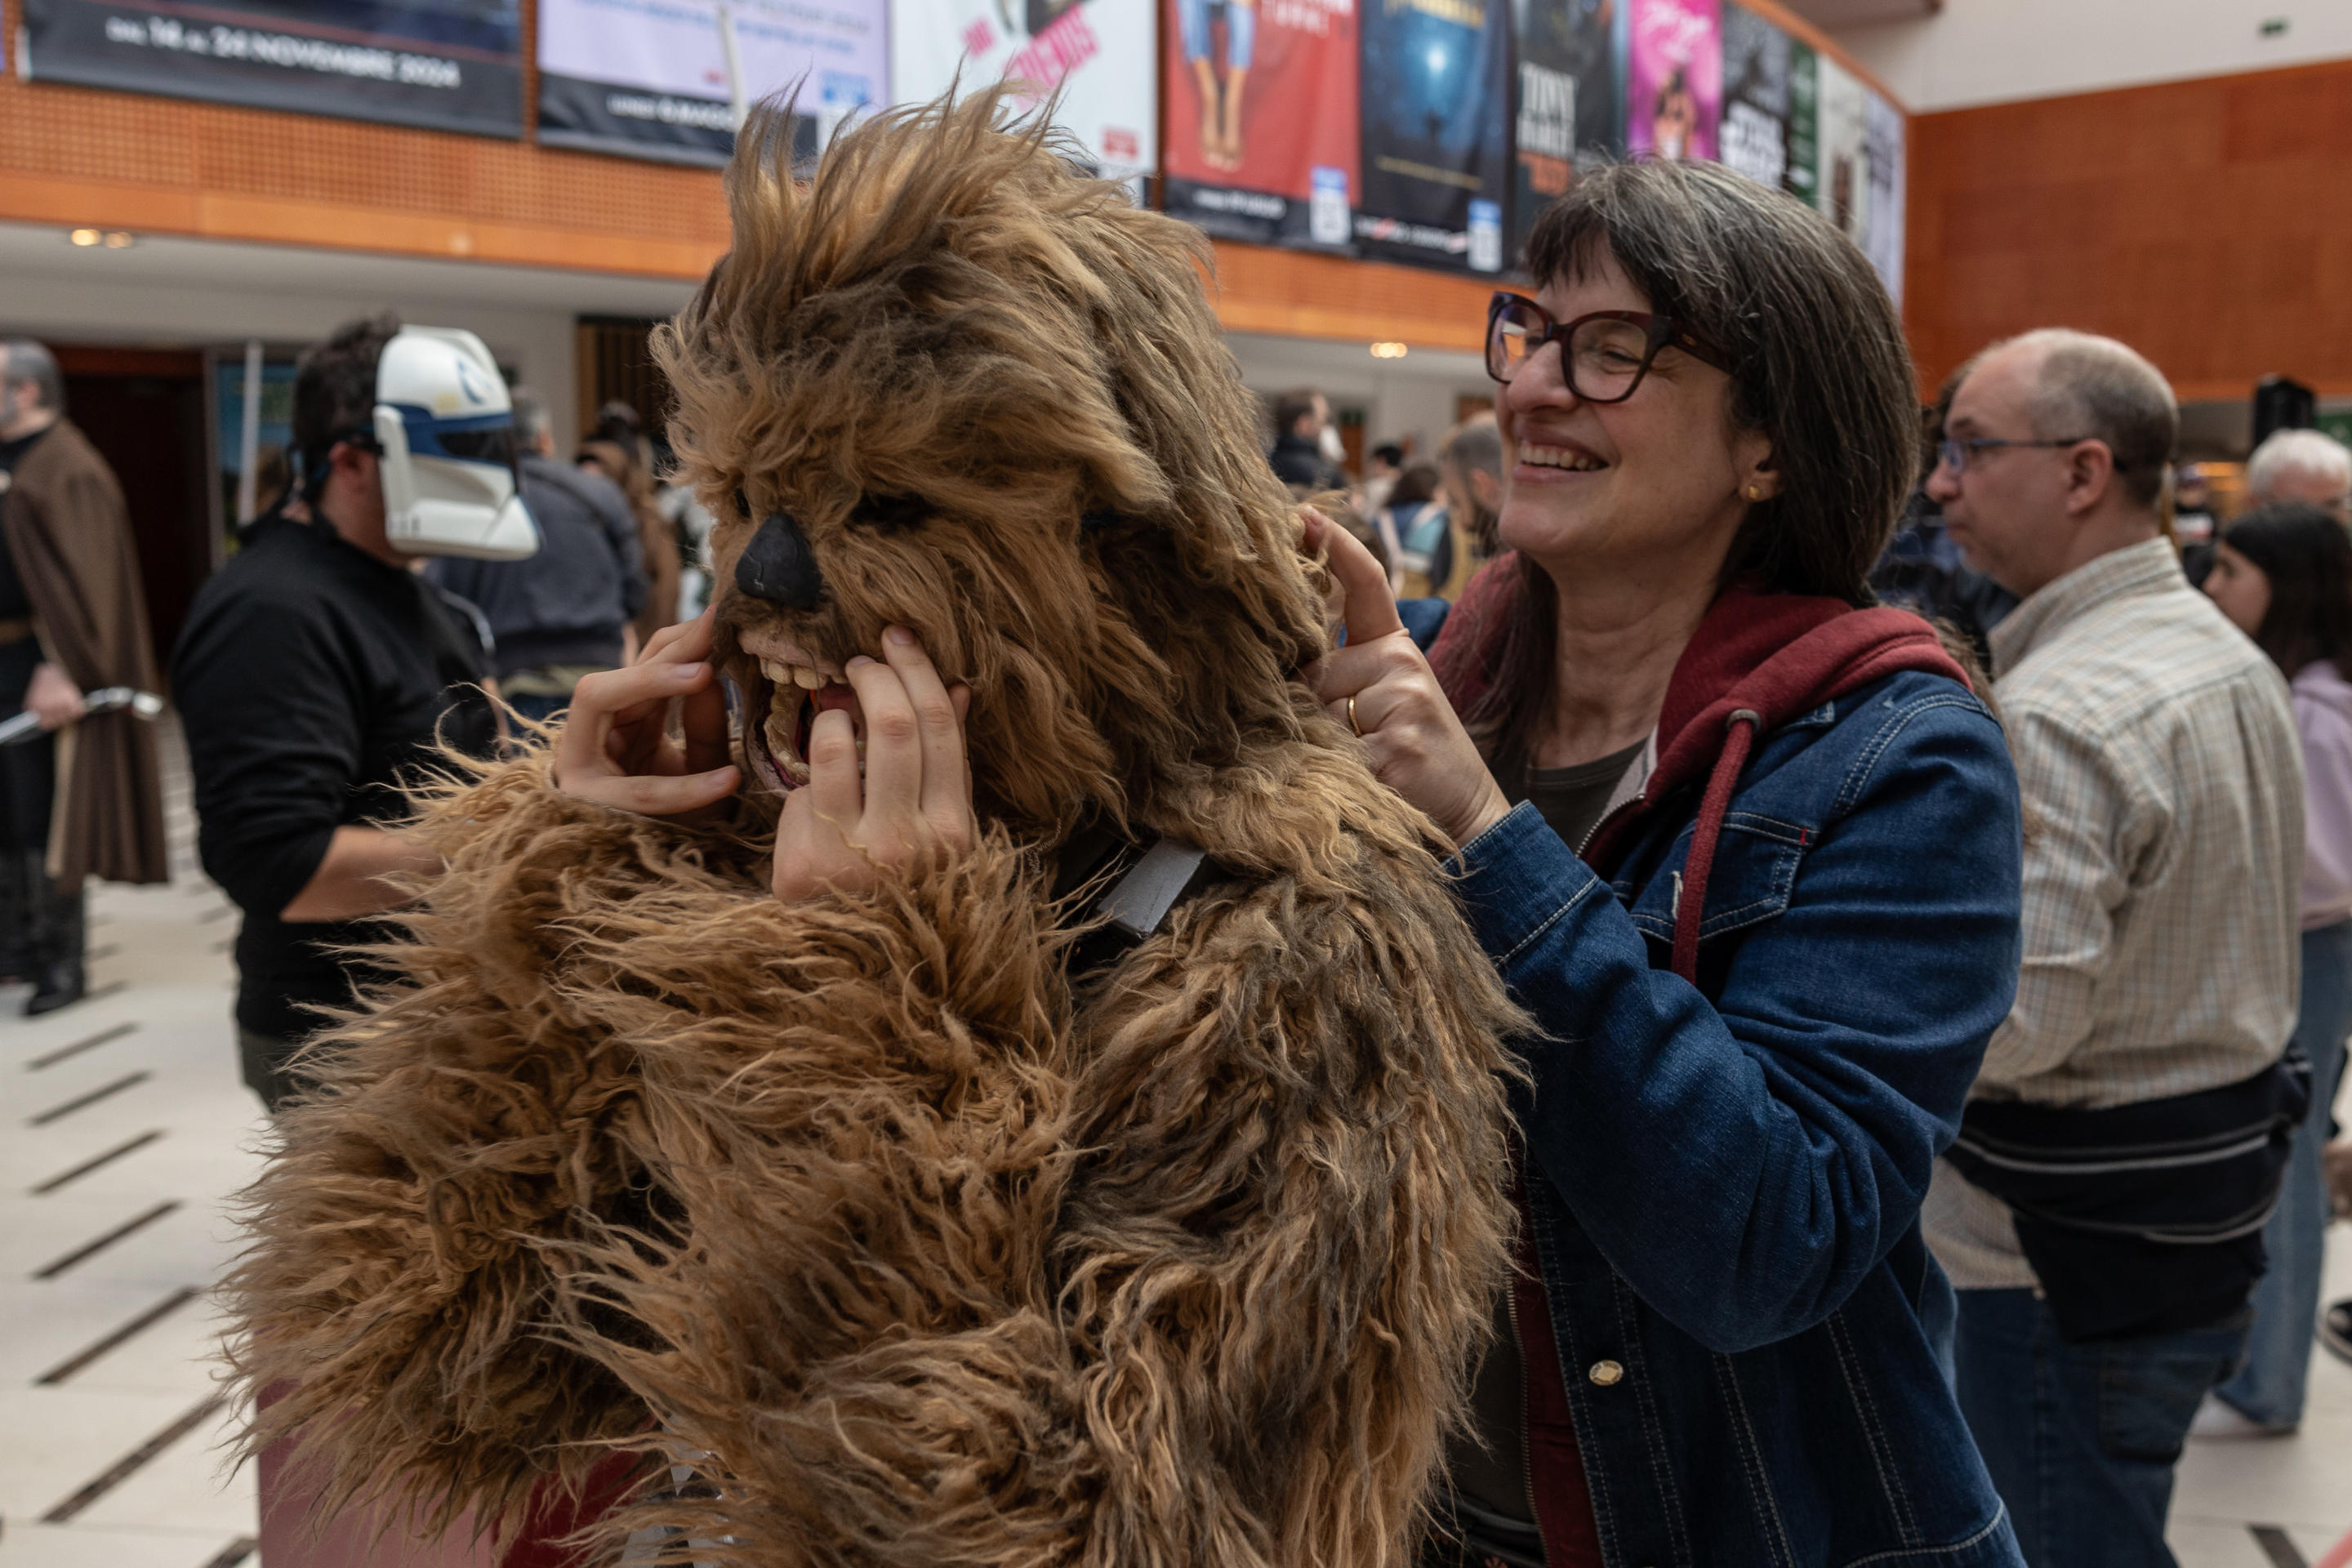 A woman helps her daughter into a Chewbacca costume in Milan.